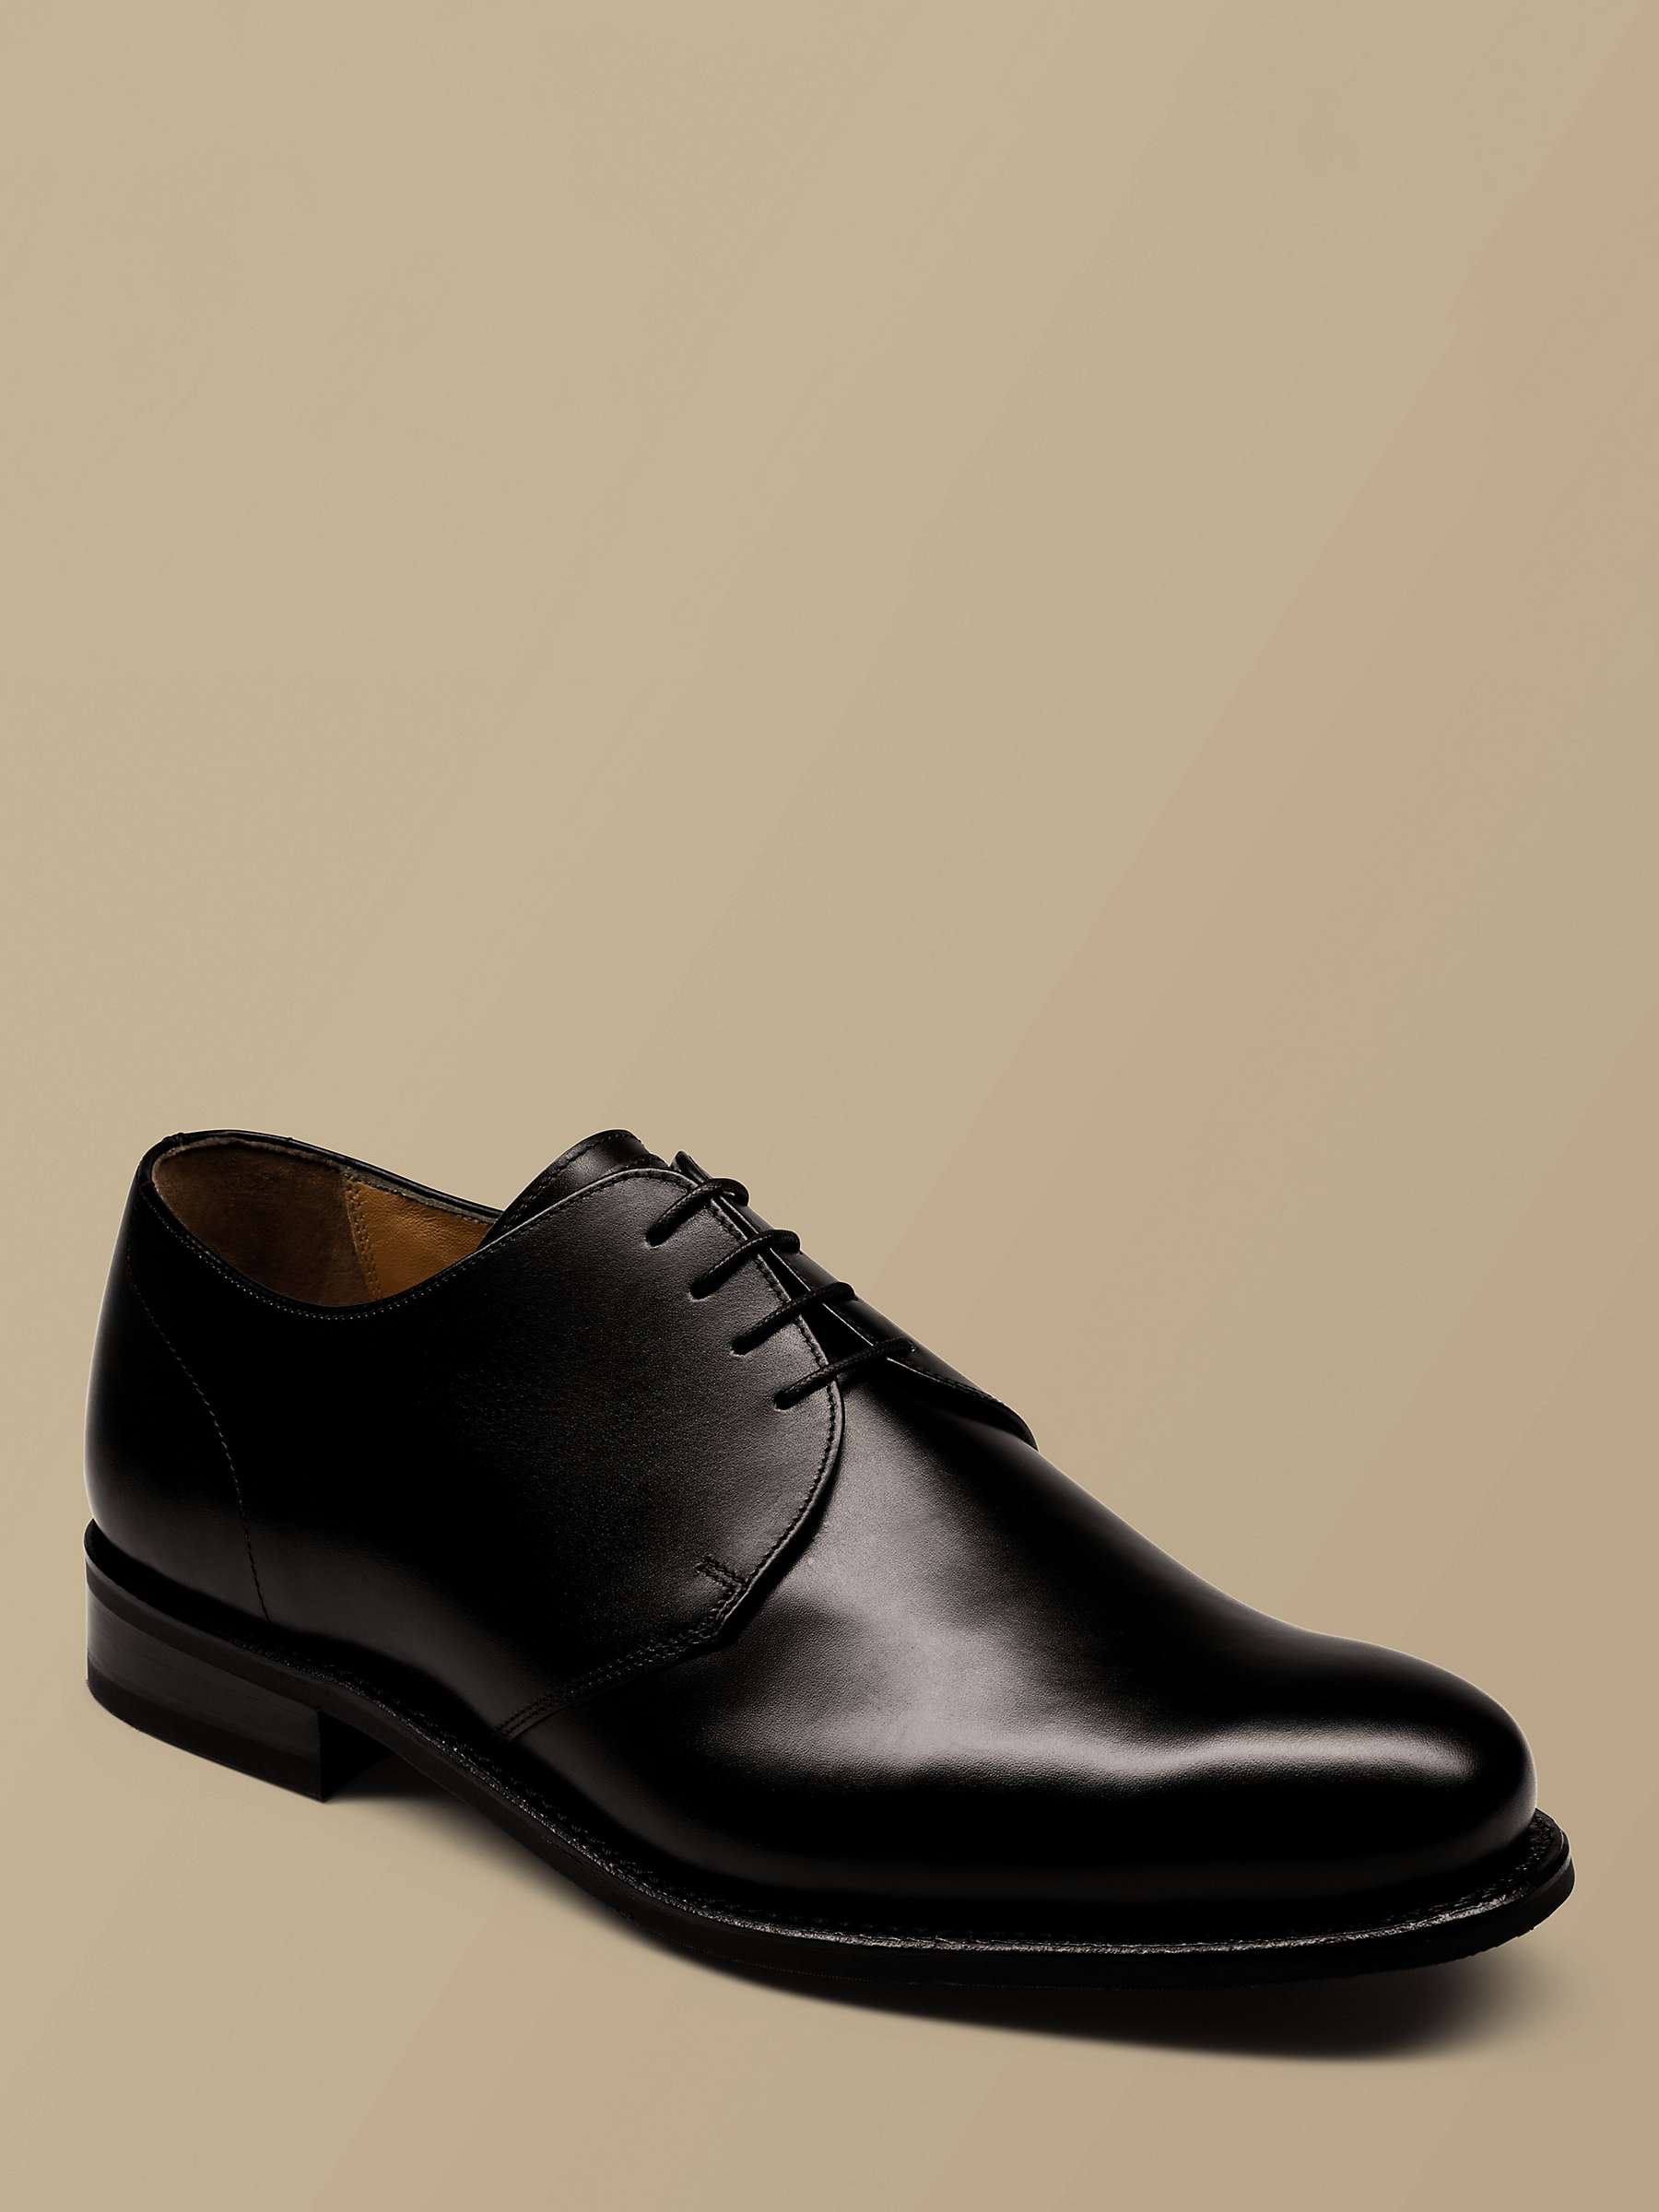 Buy Charles Tyrwhitt Leather Derby Shoes, Black Online at johnlewis.com